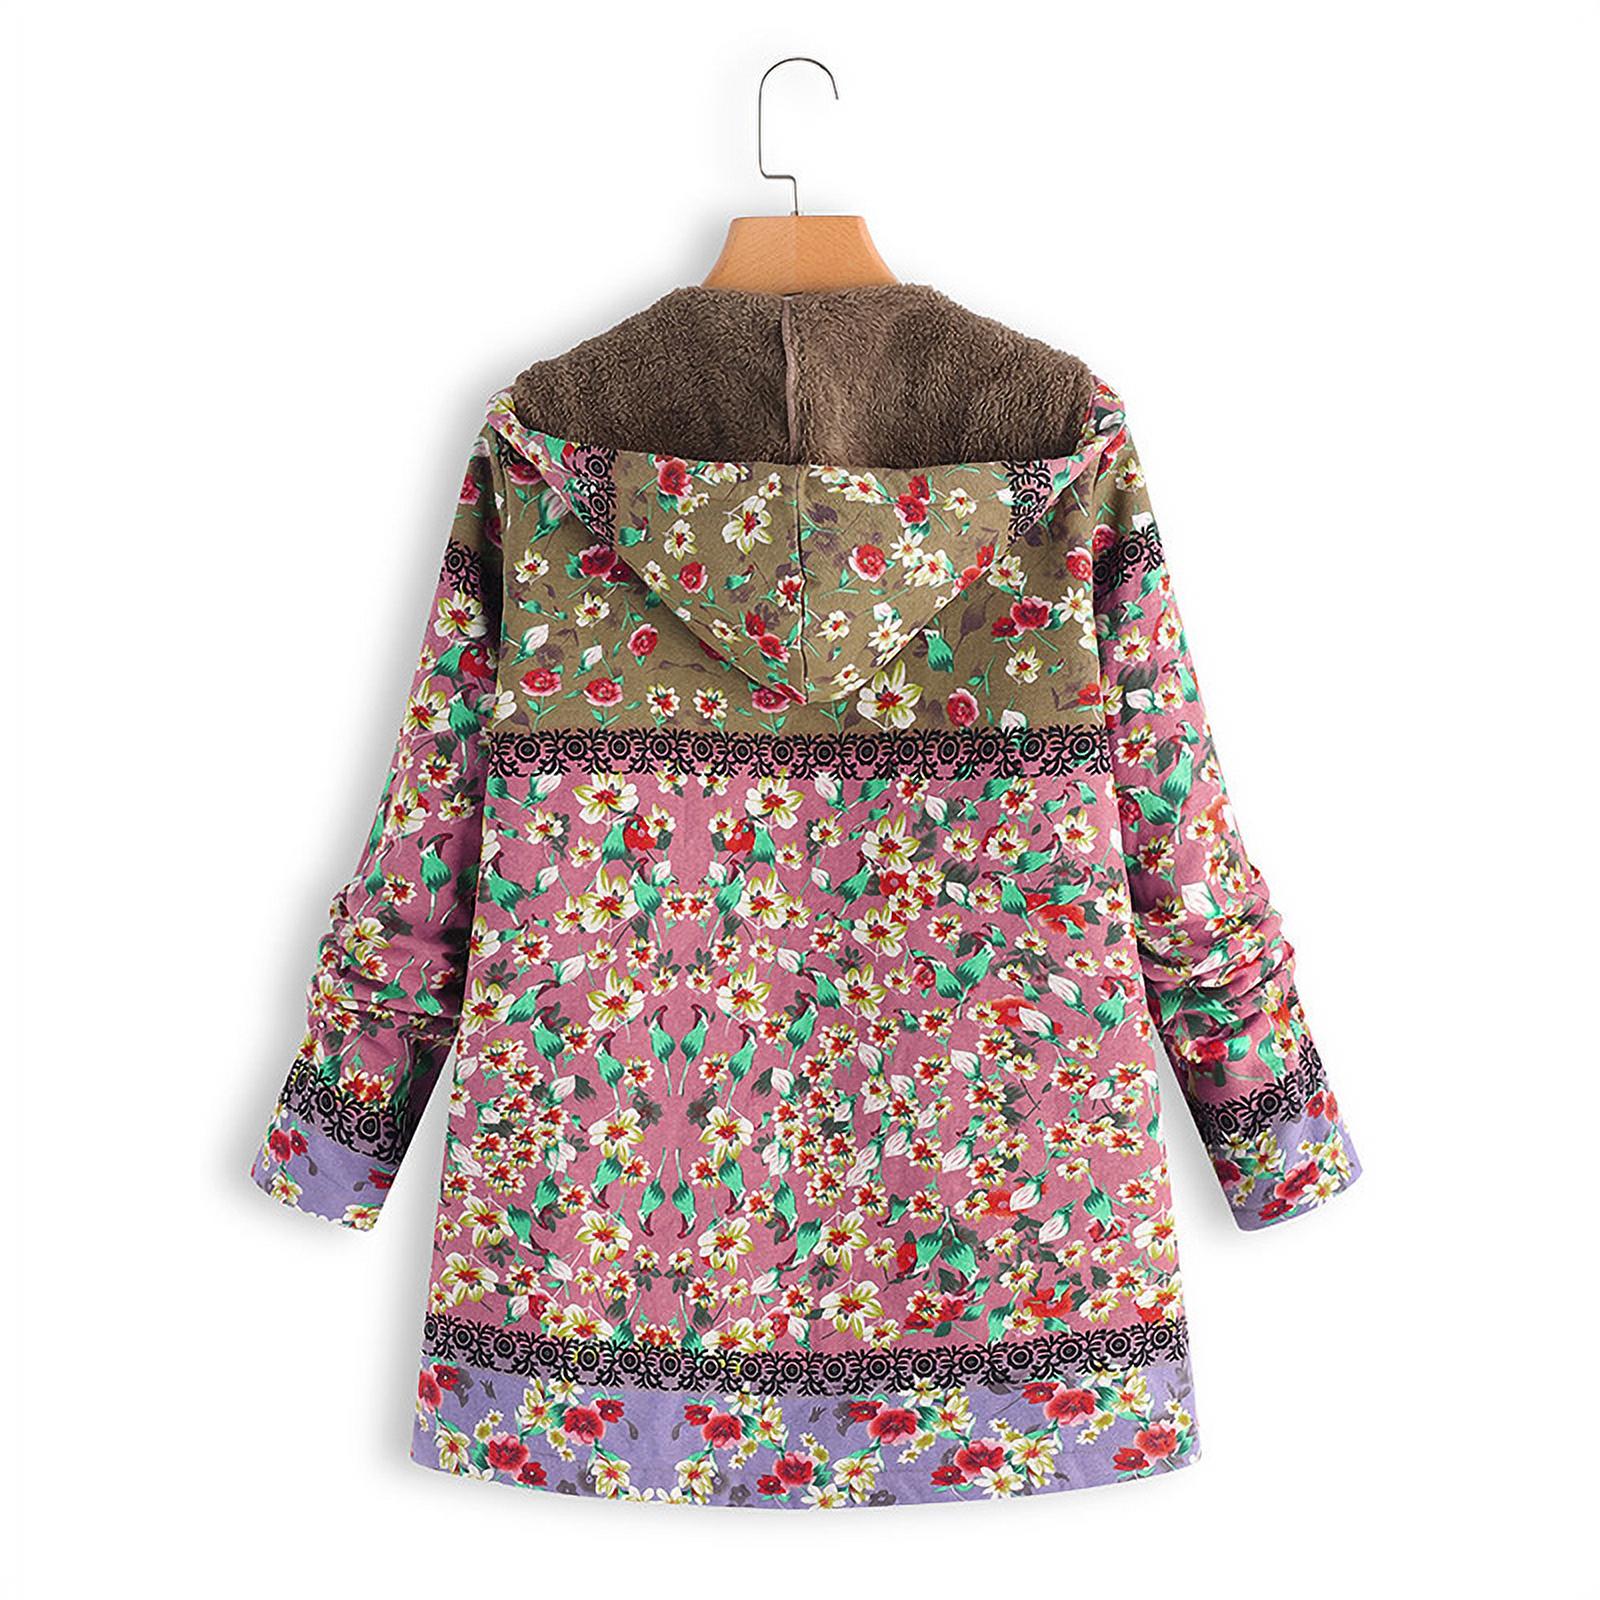 Women Winter Coat Floral Printed Hooded with Pockets Warm Fleece Button Coat Long Sleeve Jacket - image 4 of 8